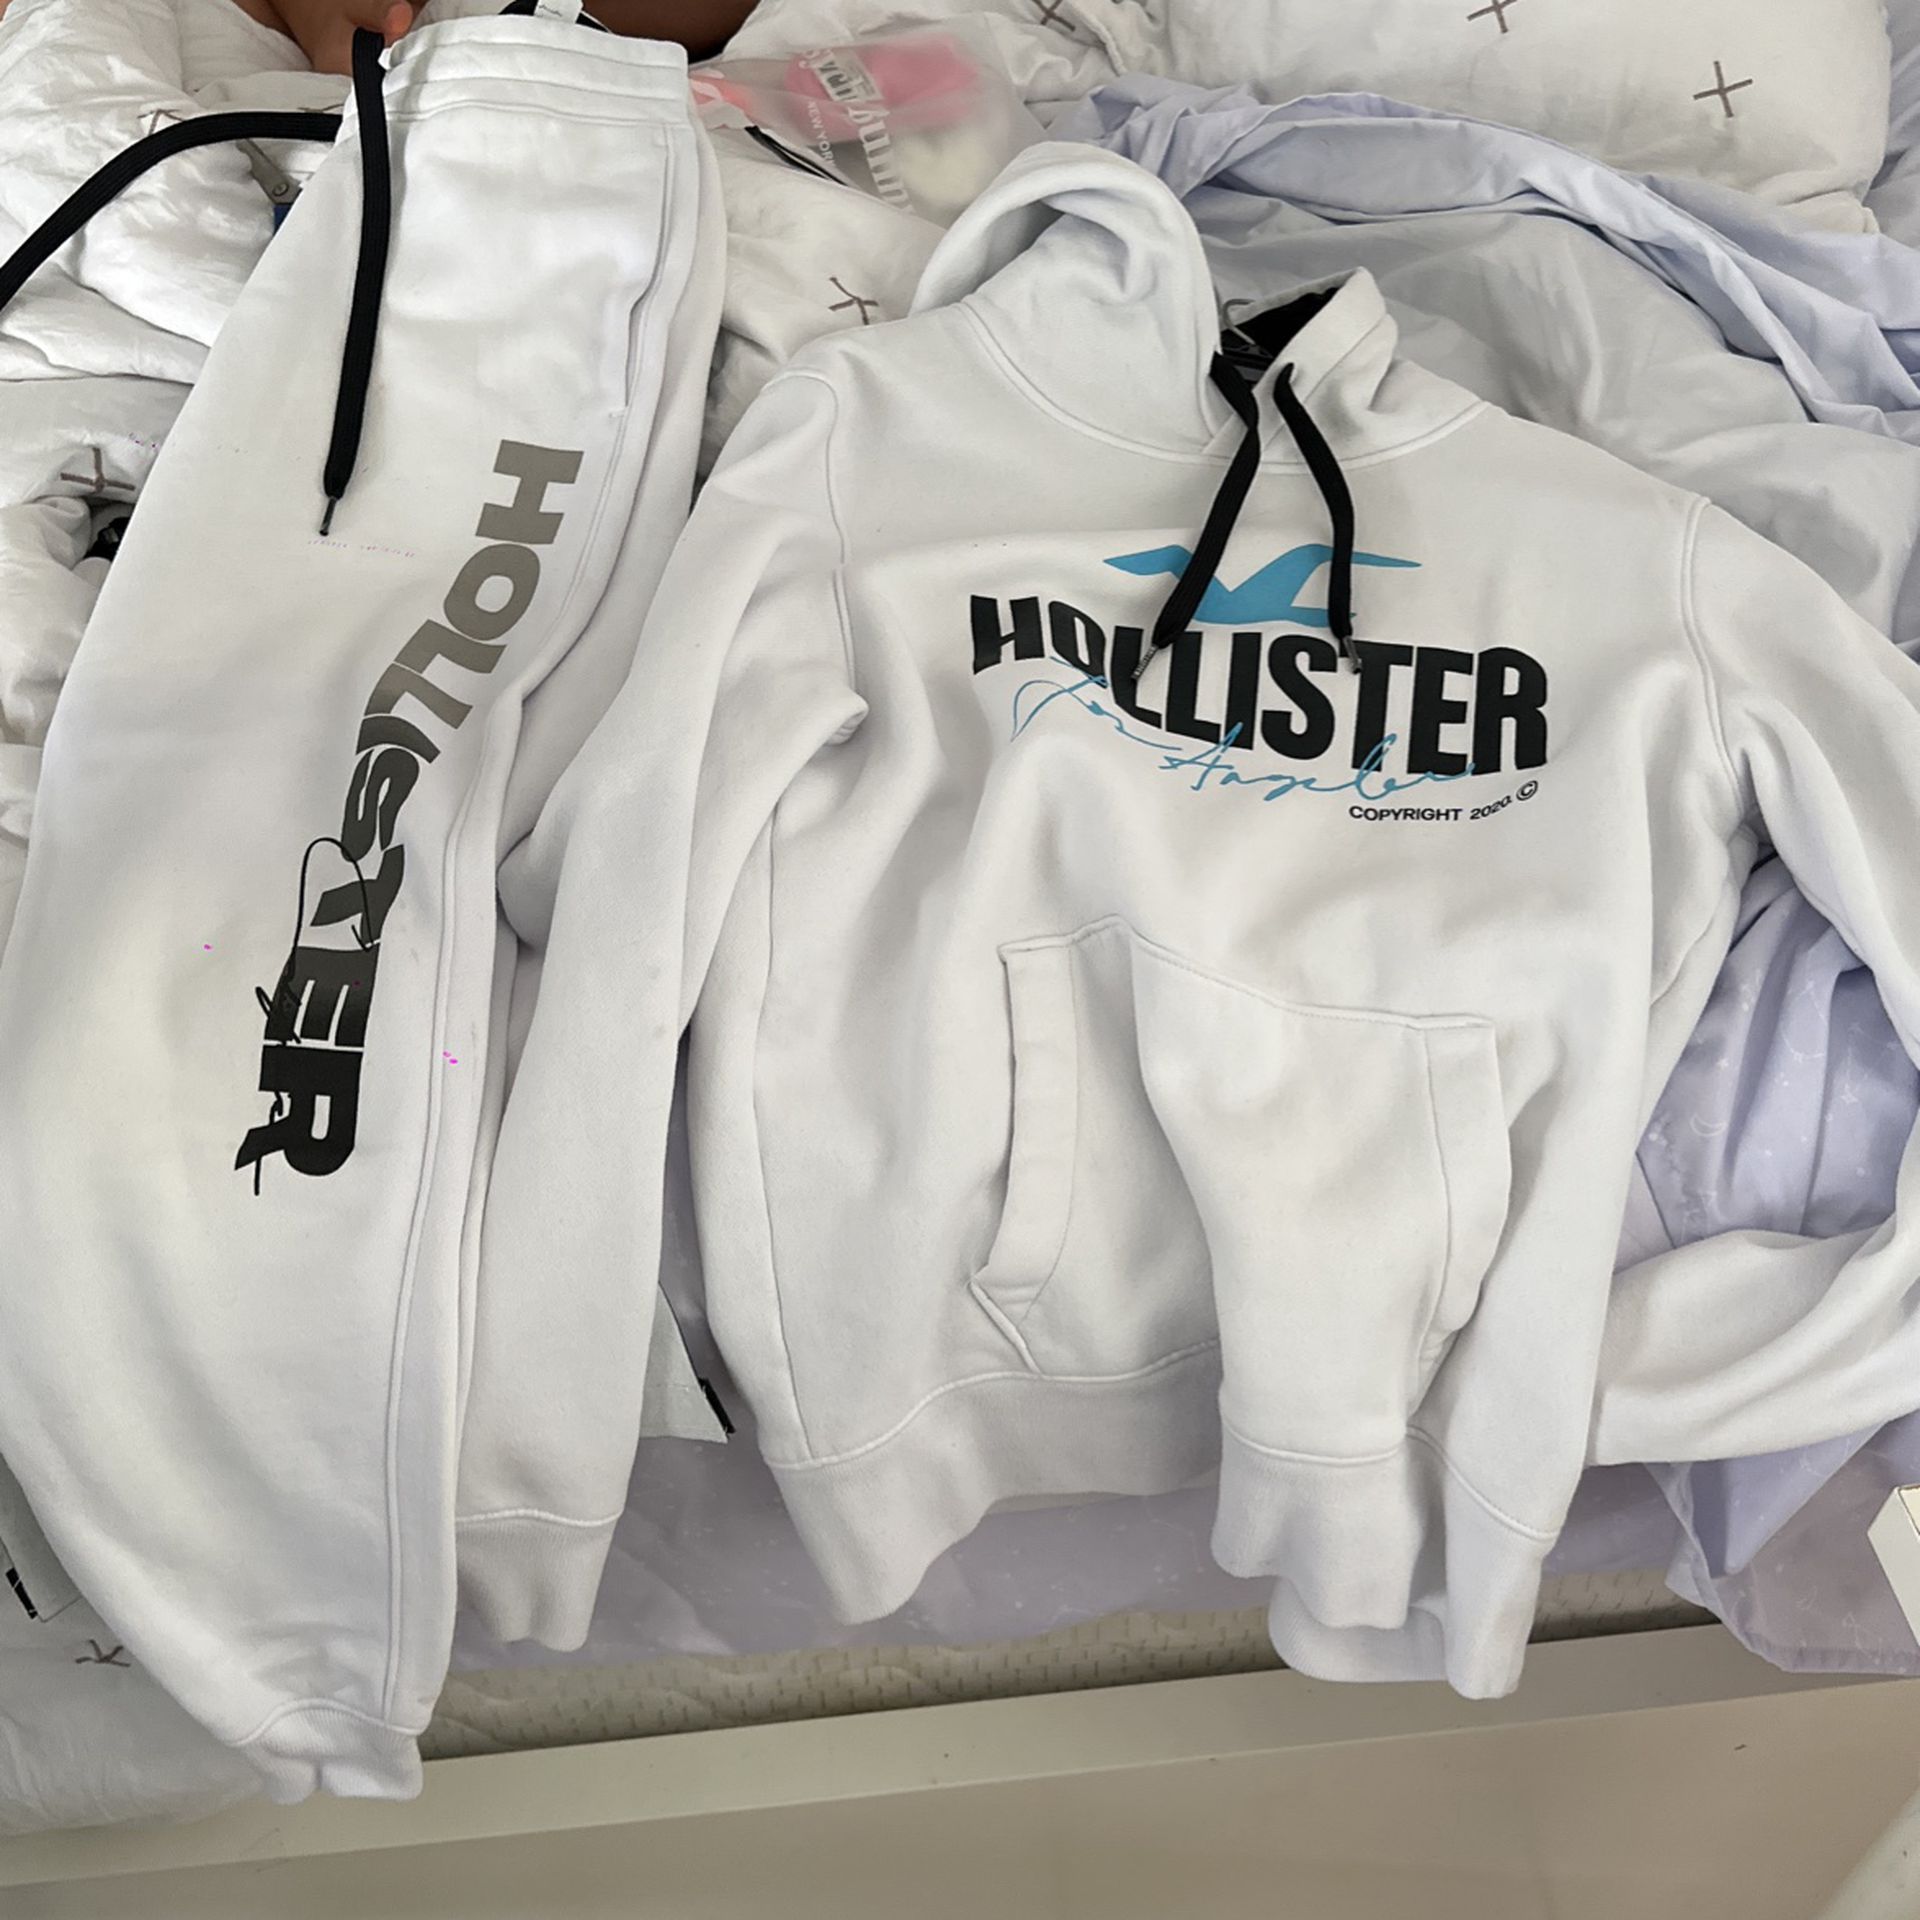 Hollister Kit Matching Outfit 